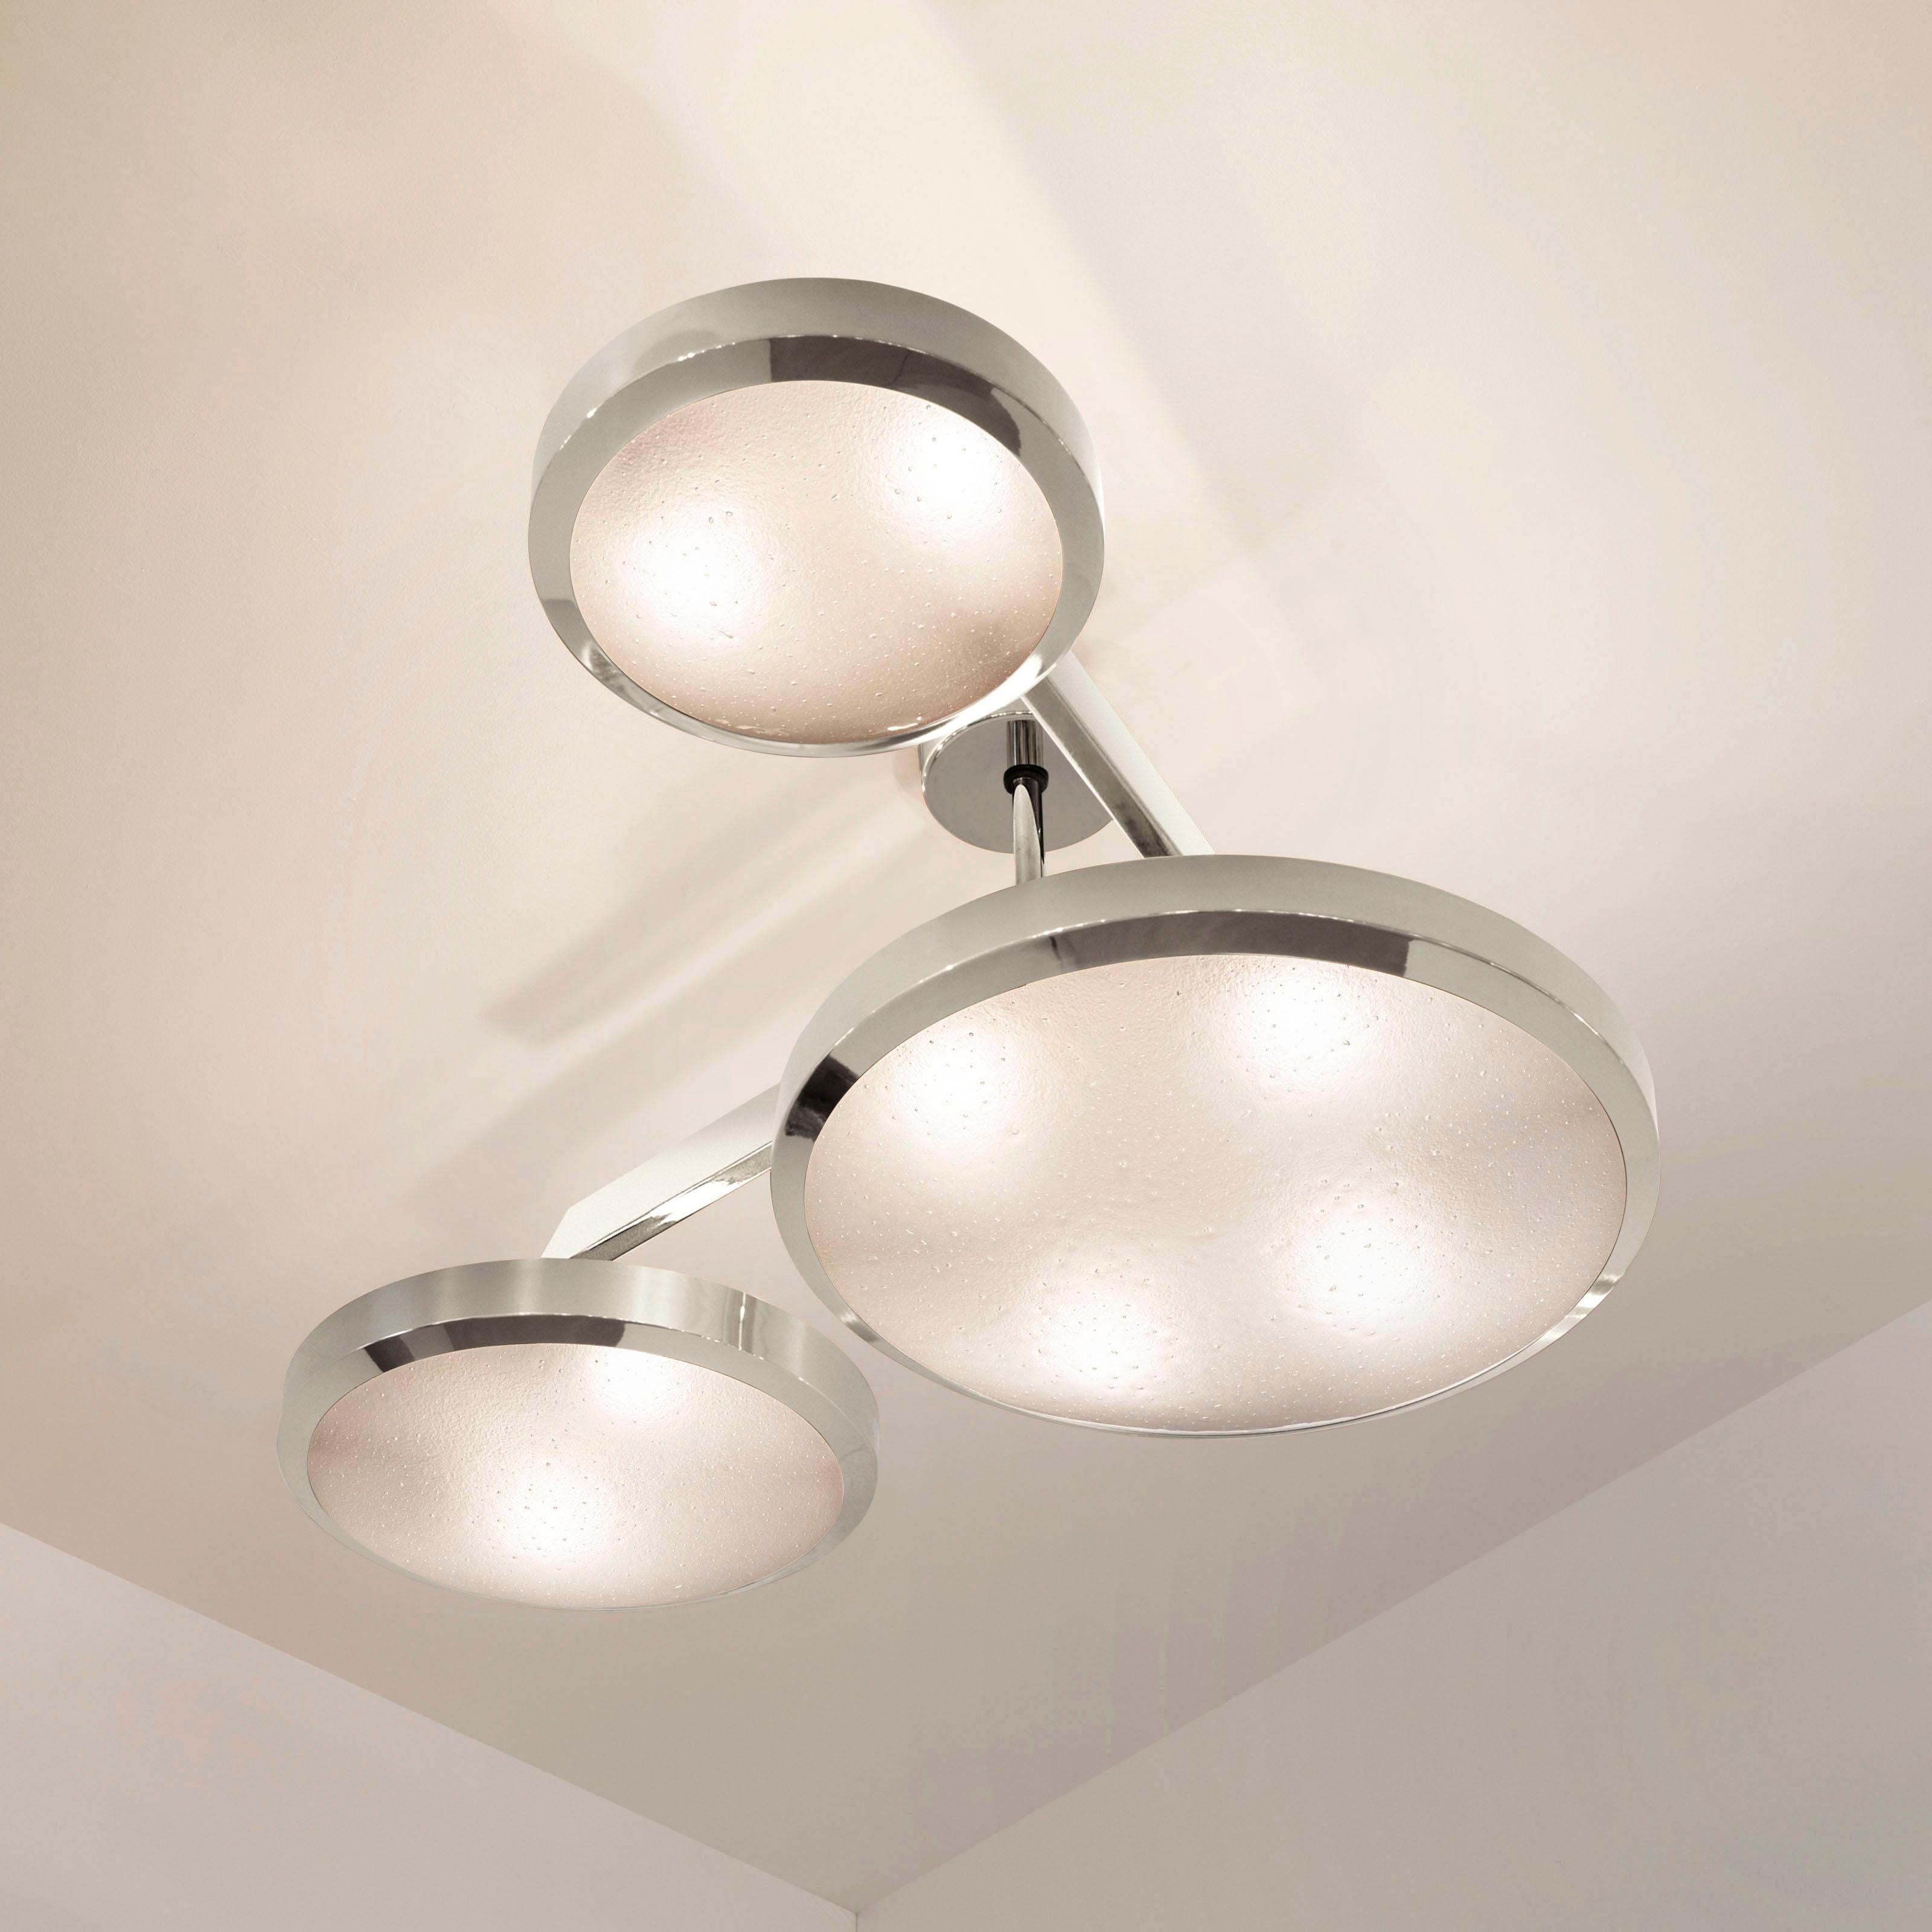 The Zeta ceiling light by form A features a composition of variable sized Murano glass shades methodically balanced on a “V” shaped brass frame. The first images show the fixture in our polished nickel finish-subsequent pictures show it in a